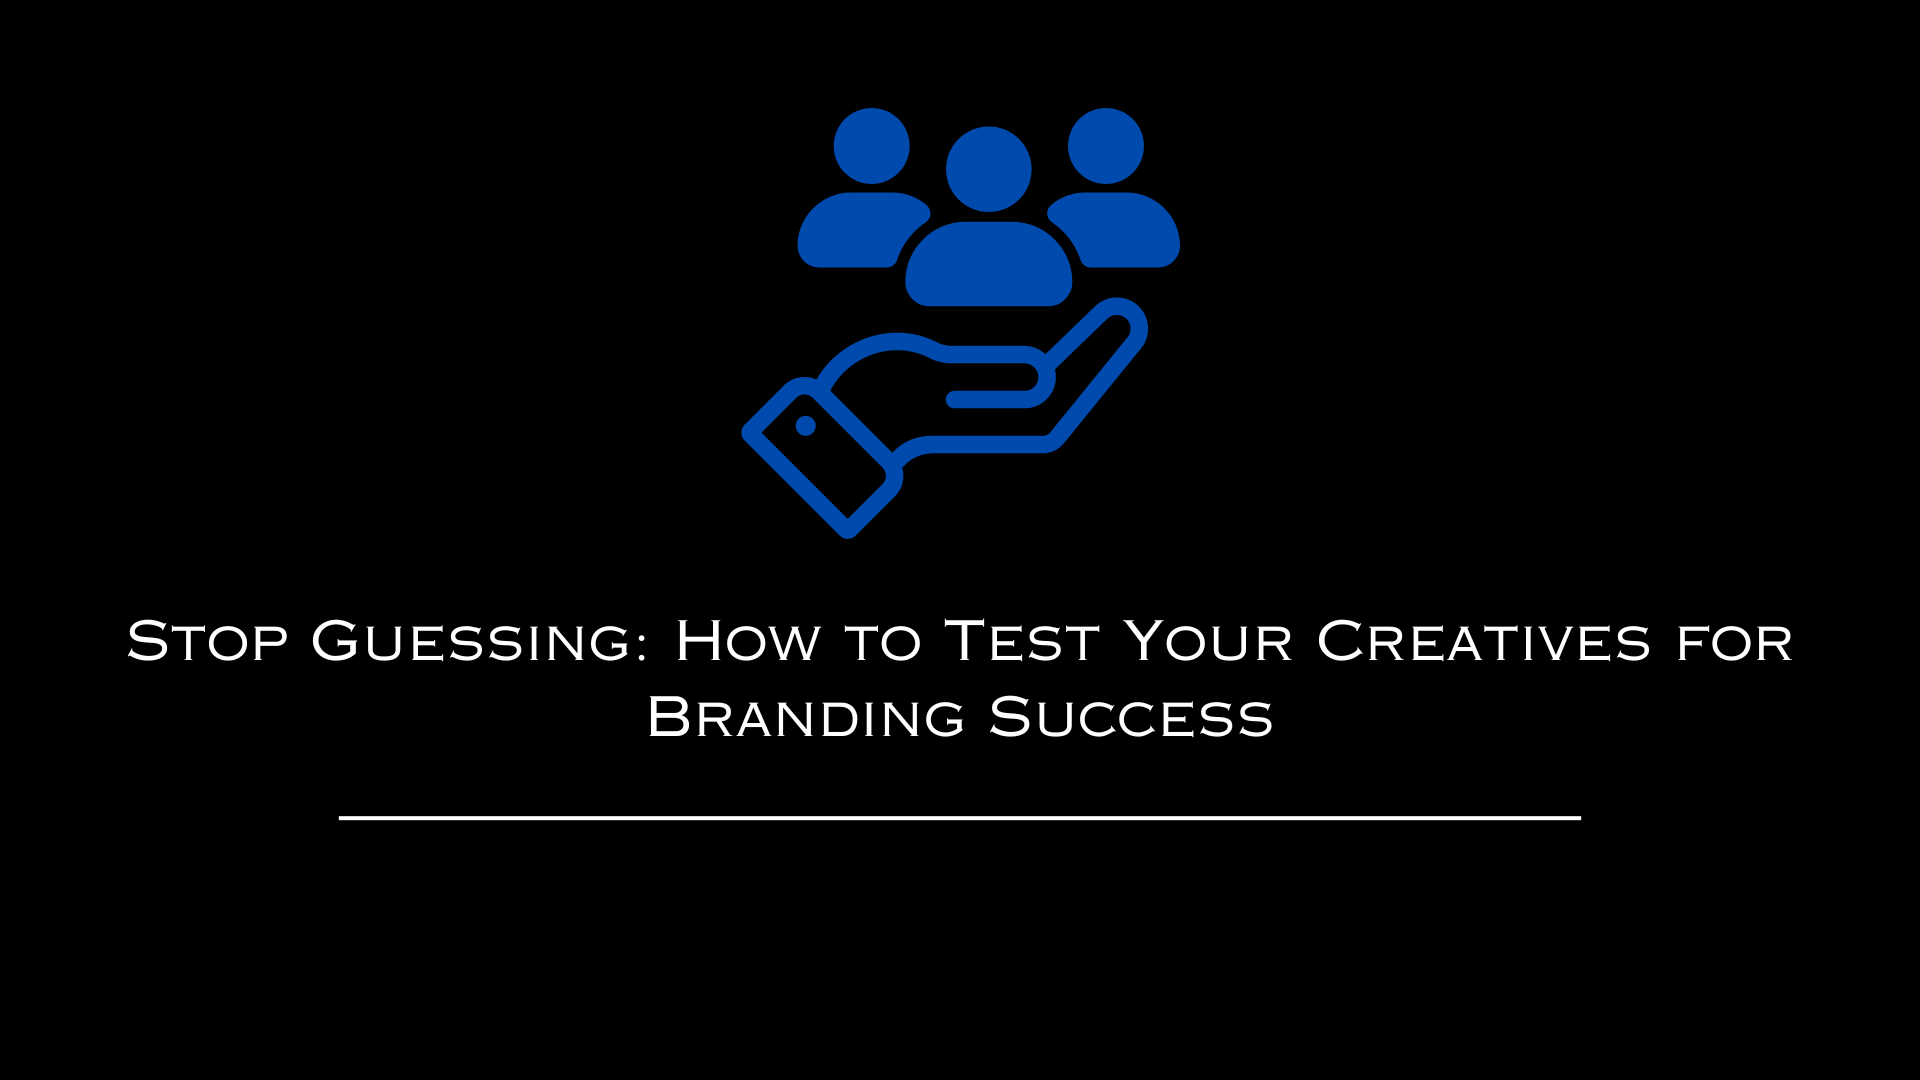 Stop Guessing: How to Test Your Creatives for Branding Success